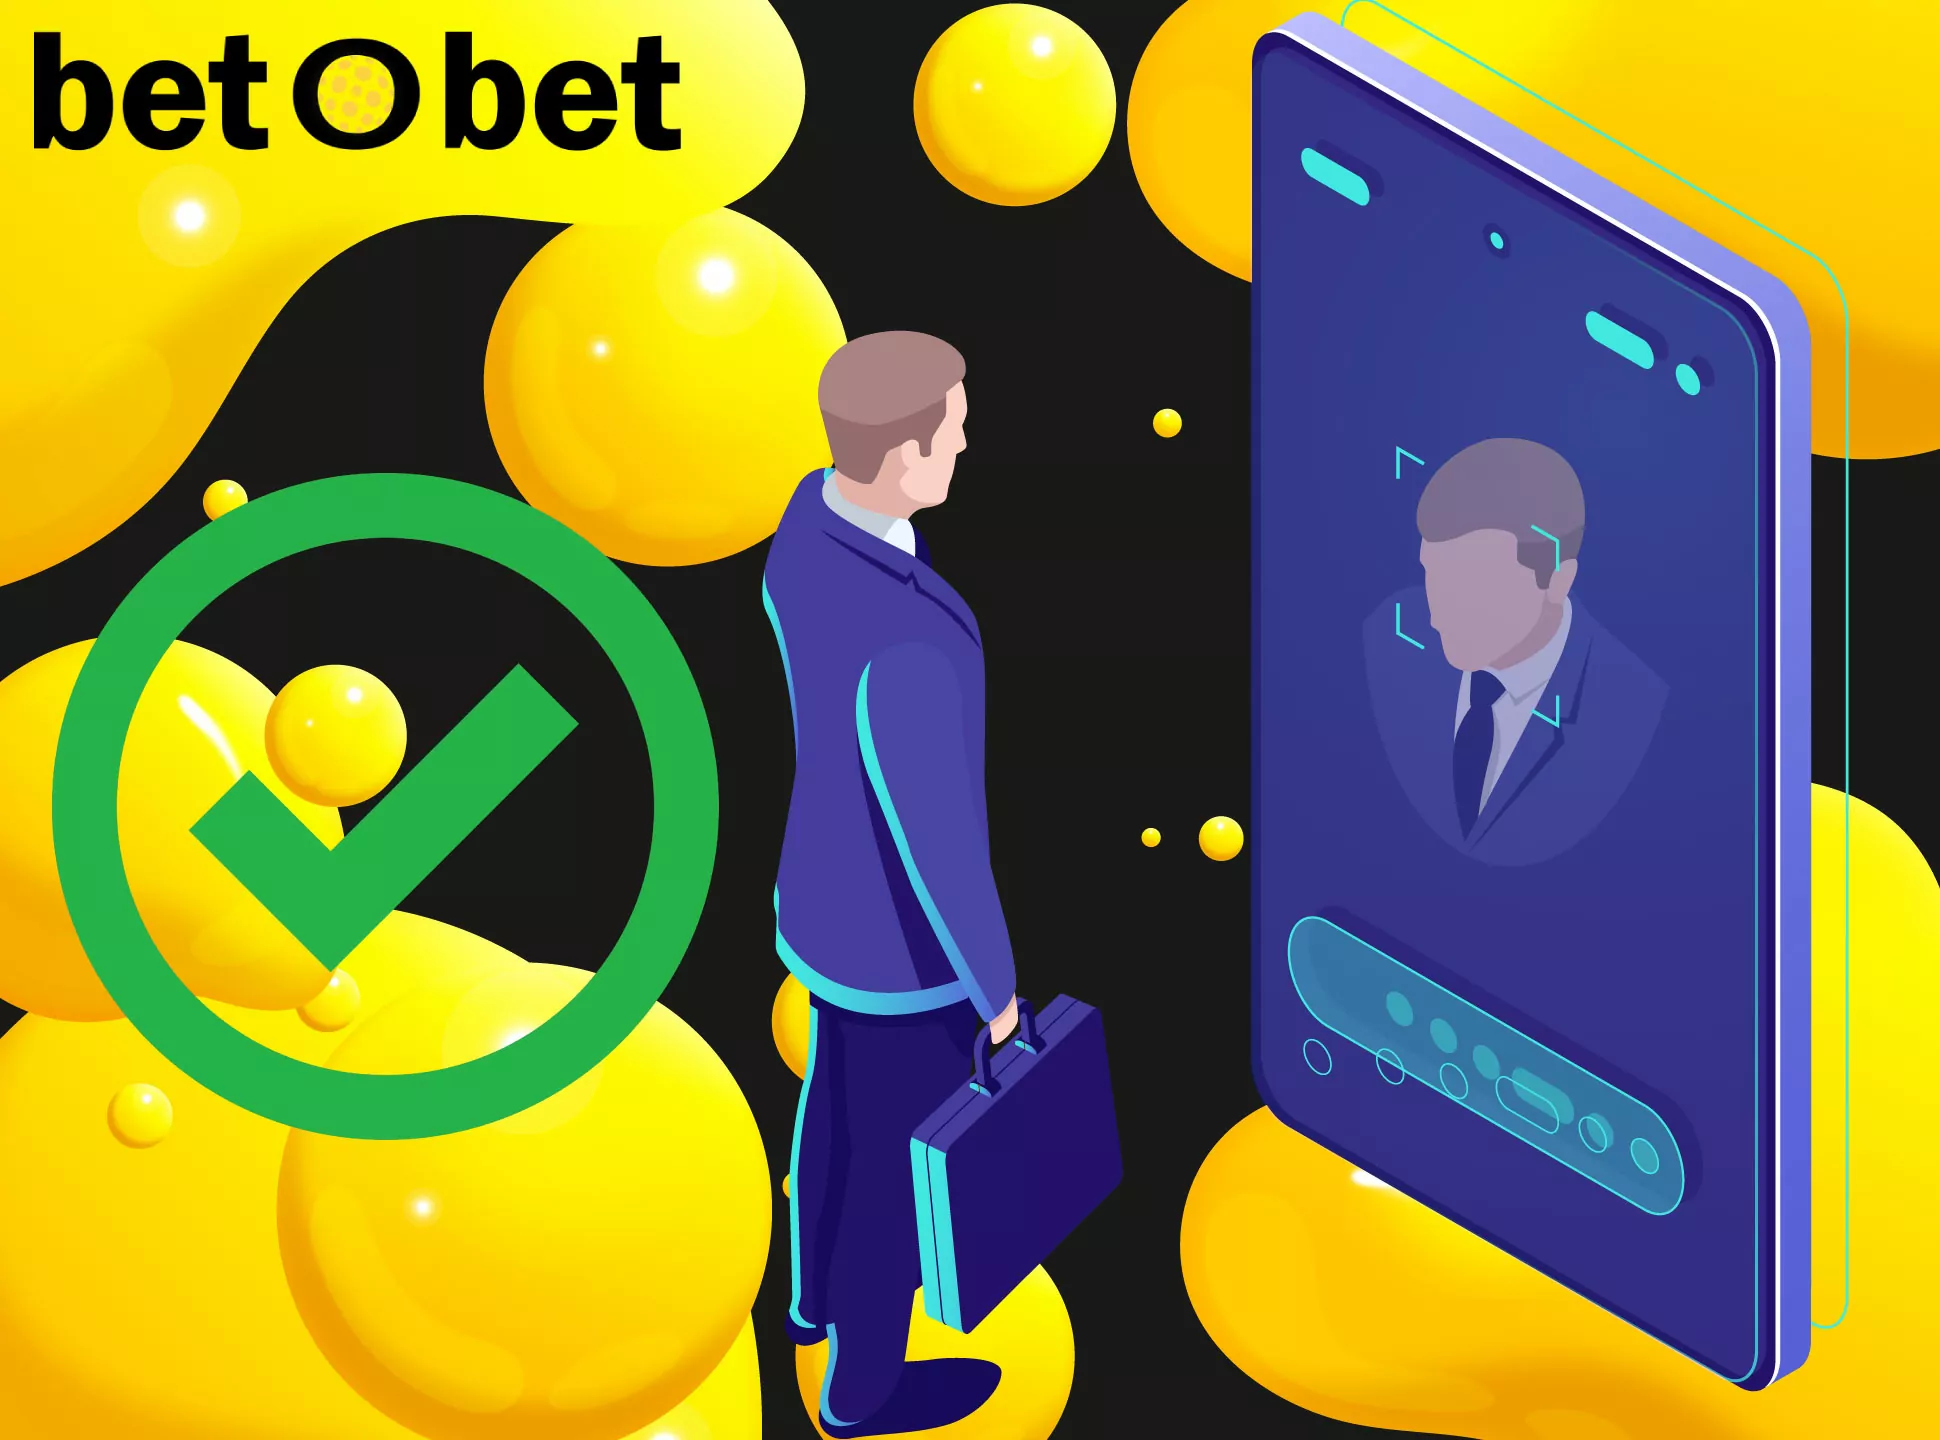 All the Betobet users should pass the verification process.